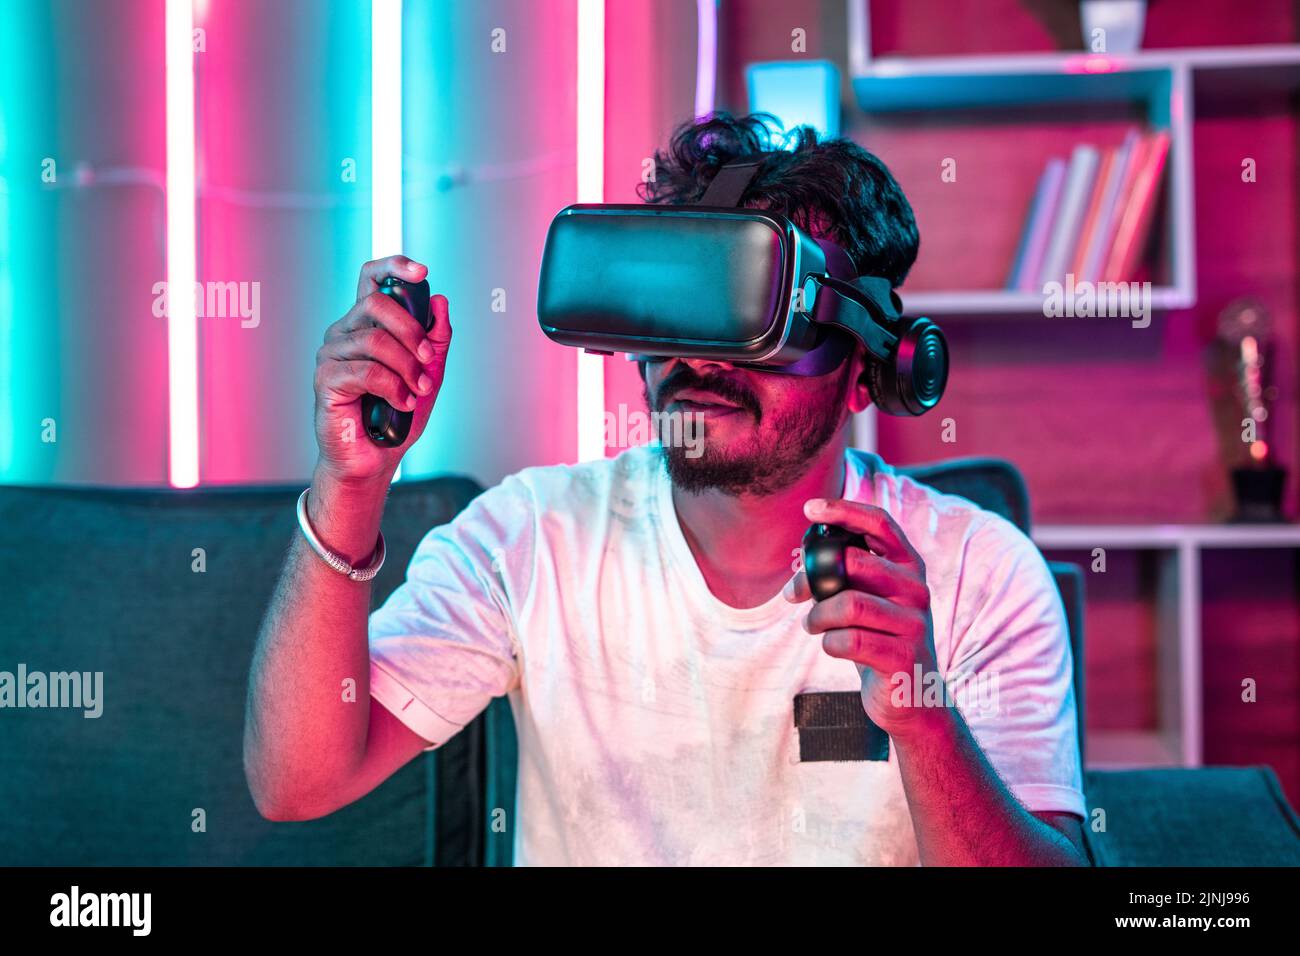 Focus on VR, Young gamer playing video game on virtual reality or VR headset using joystick at home - concept of metaverse, cyberspace and futuristic. Stock Photo